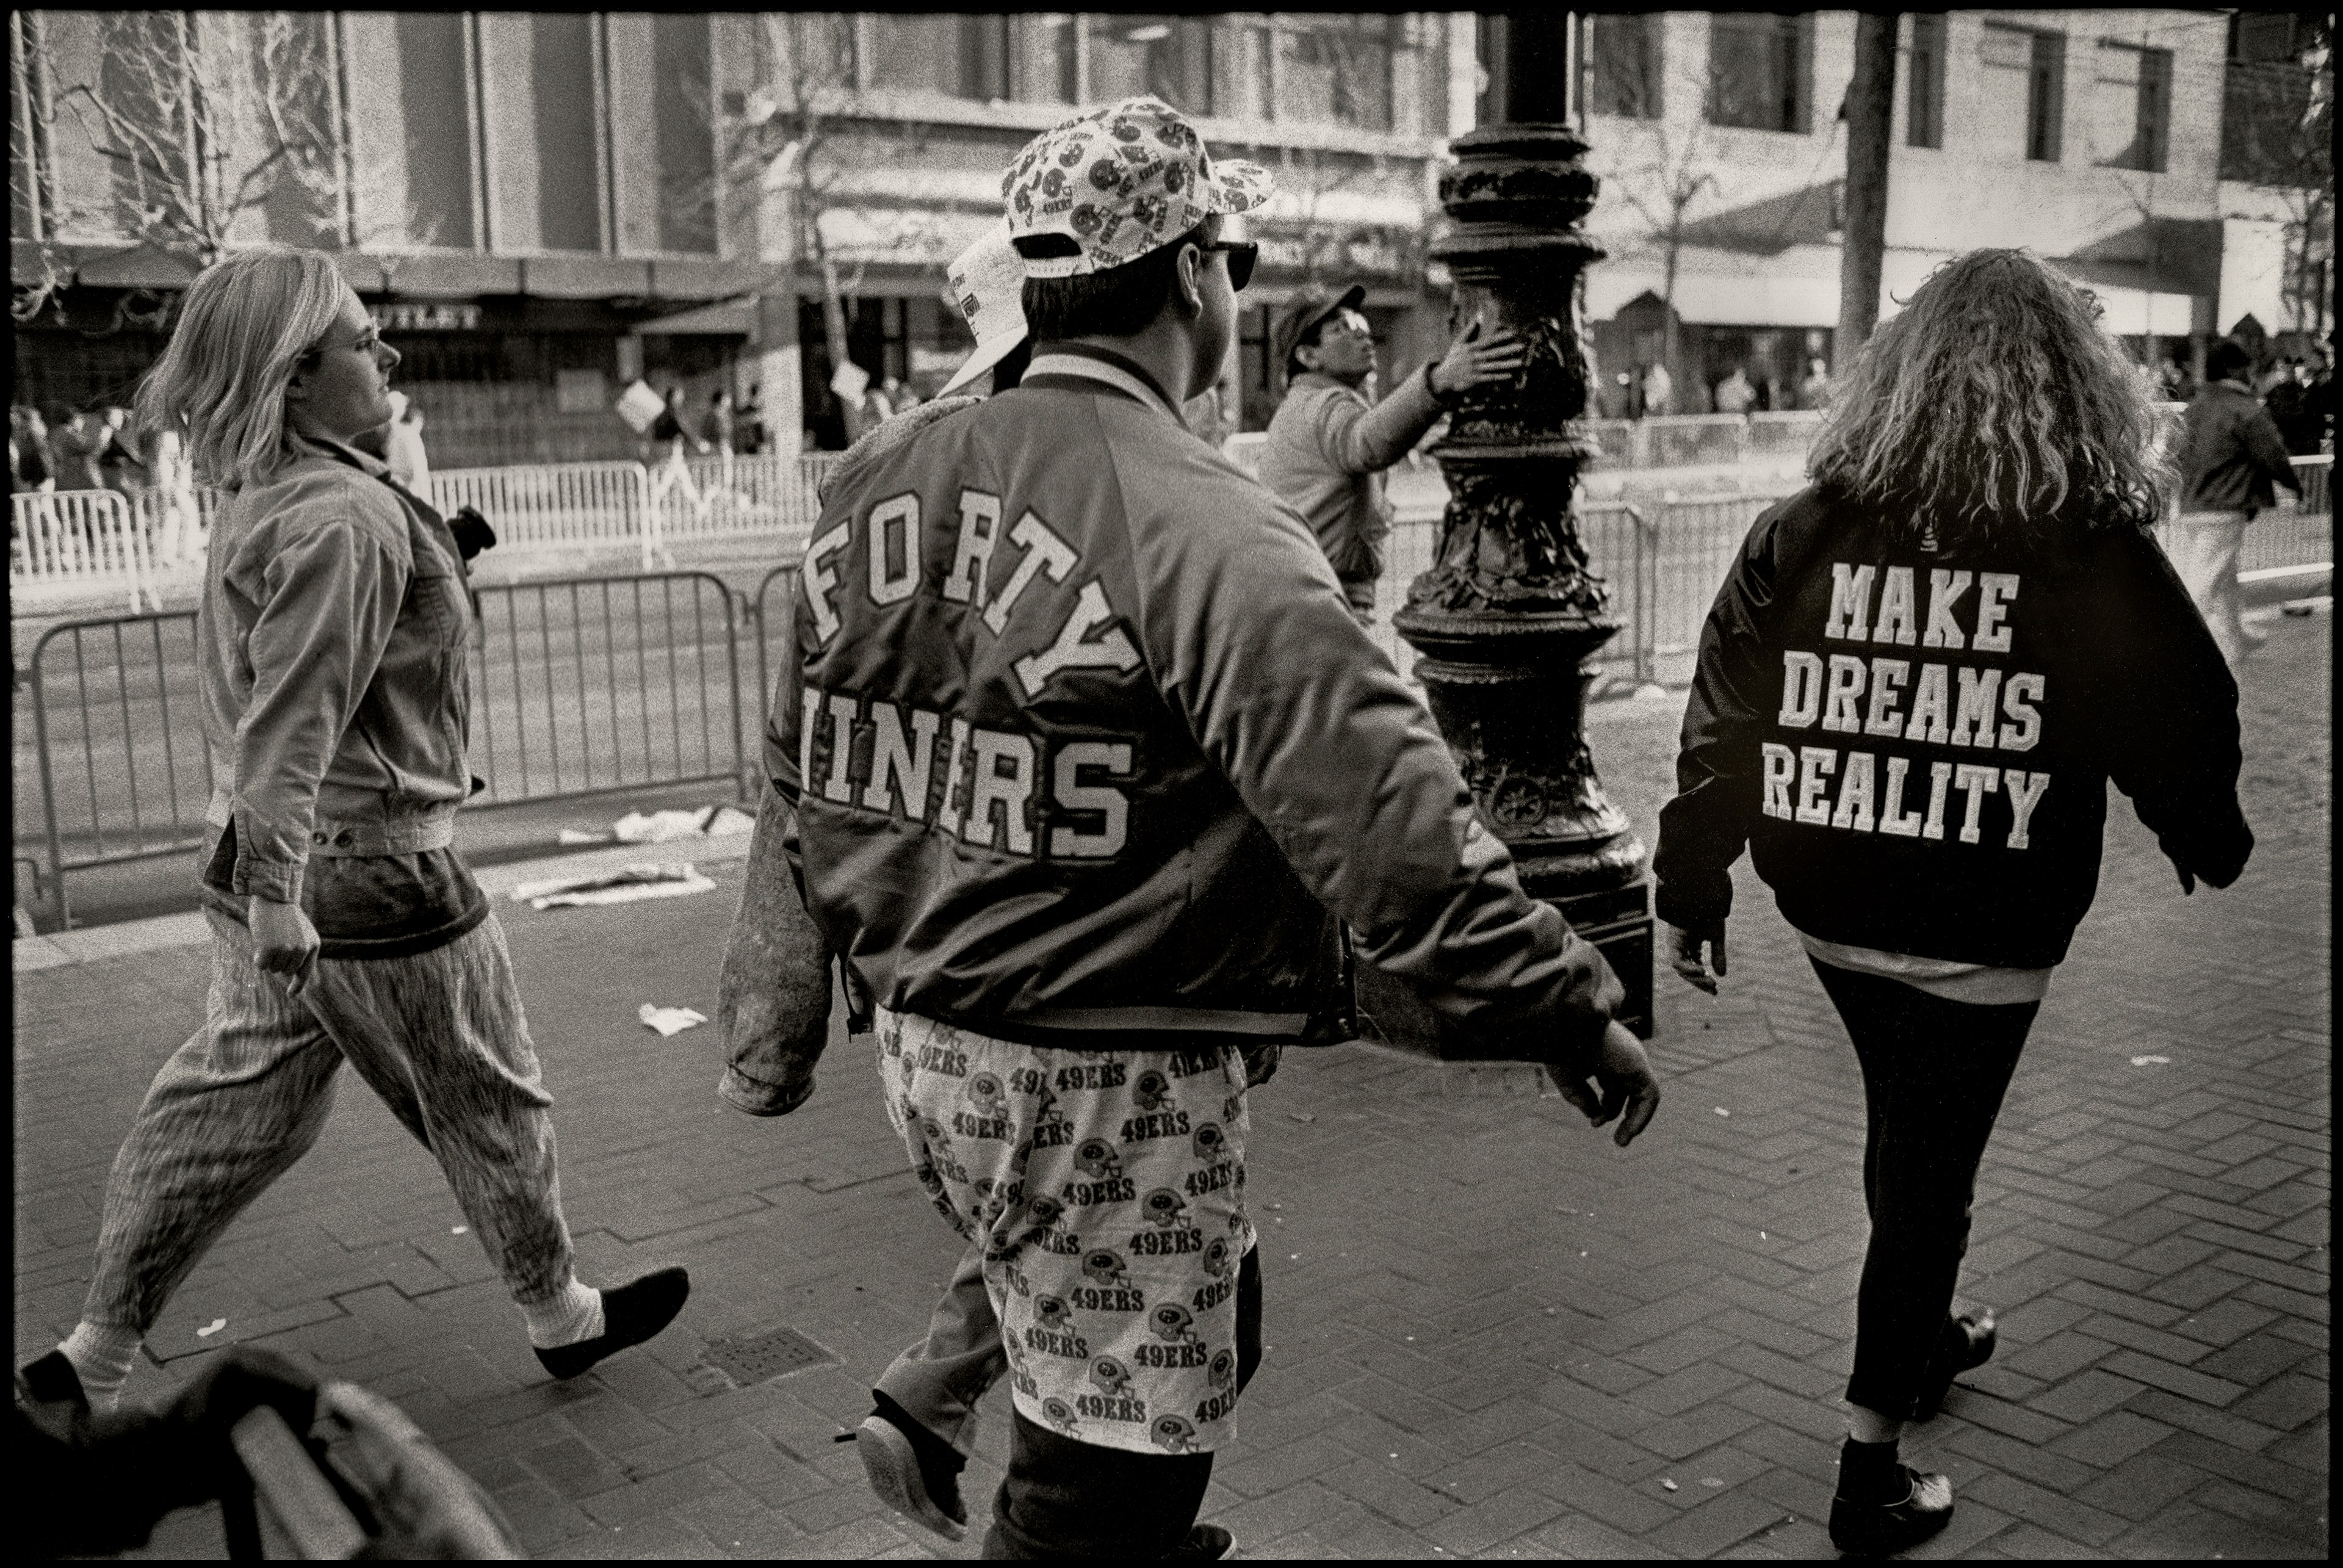 A black and white photo of a group of people, one wearing a vintage Forty-Niners jacket, walk along a street.